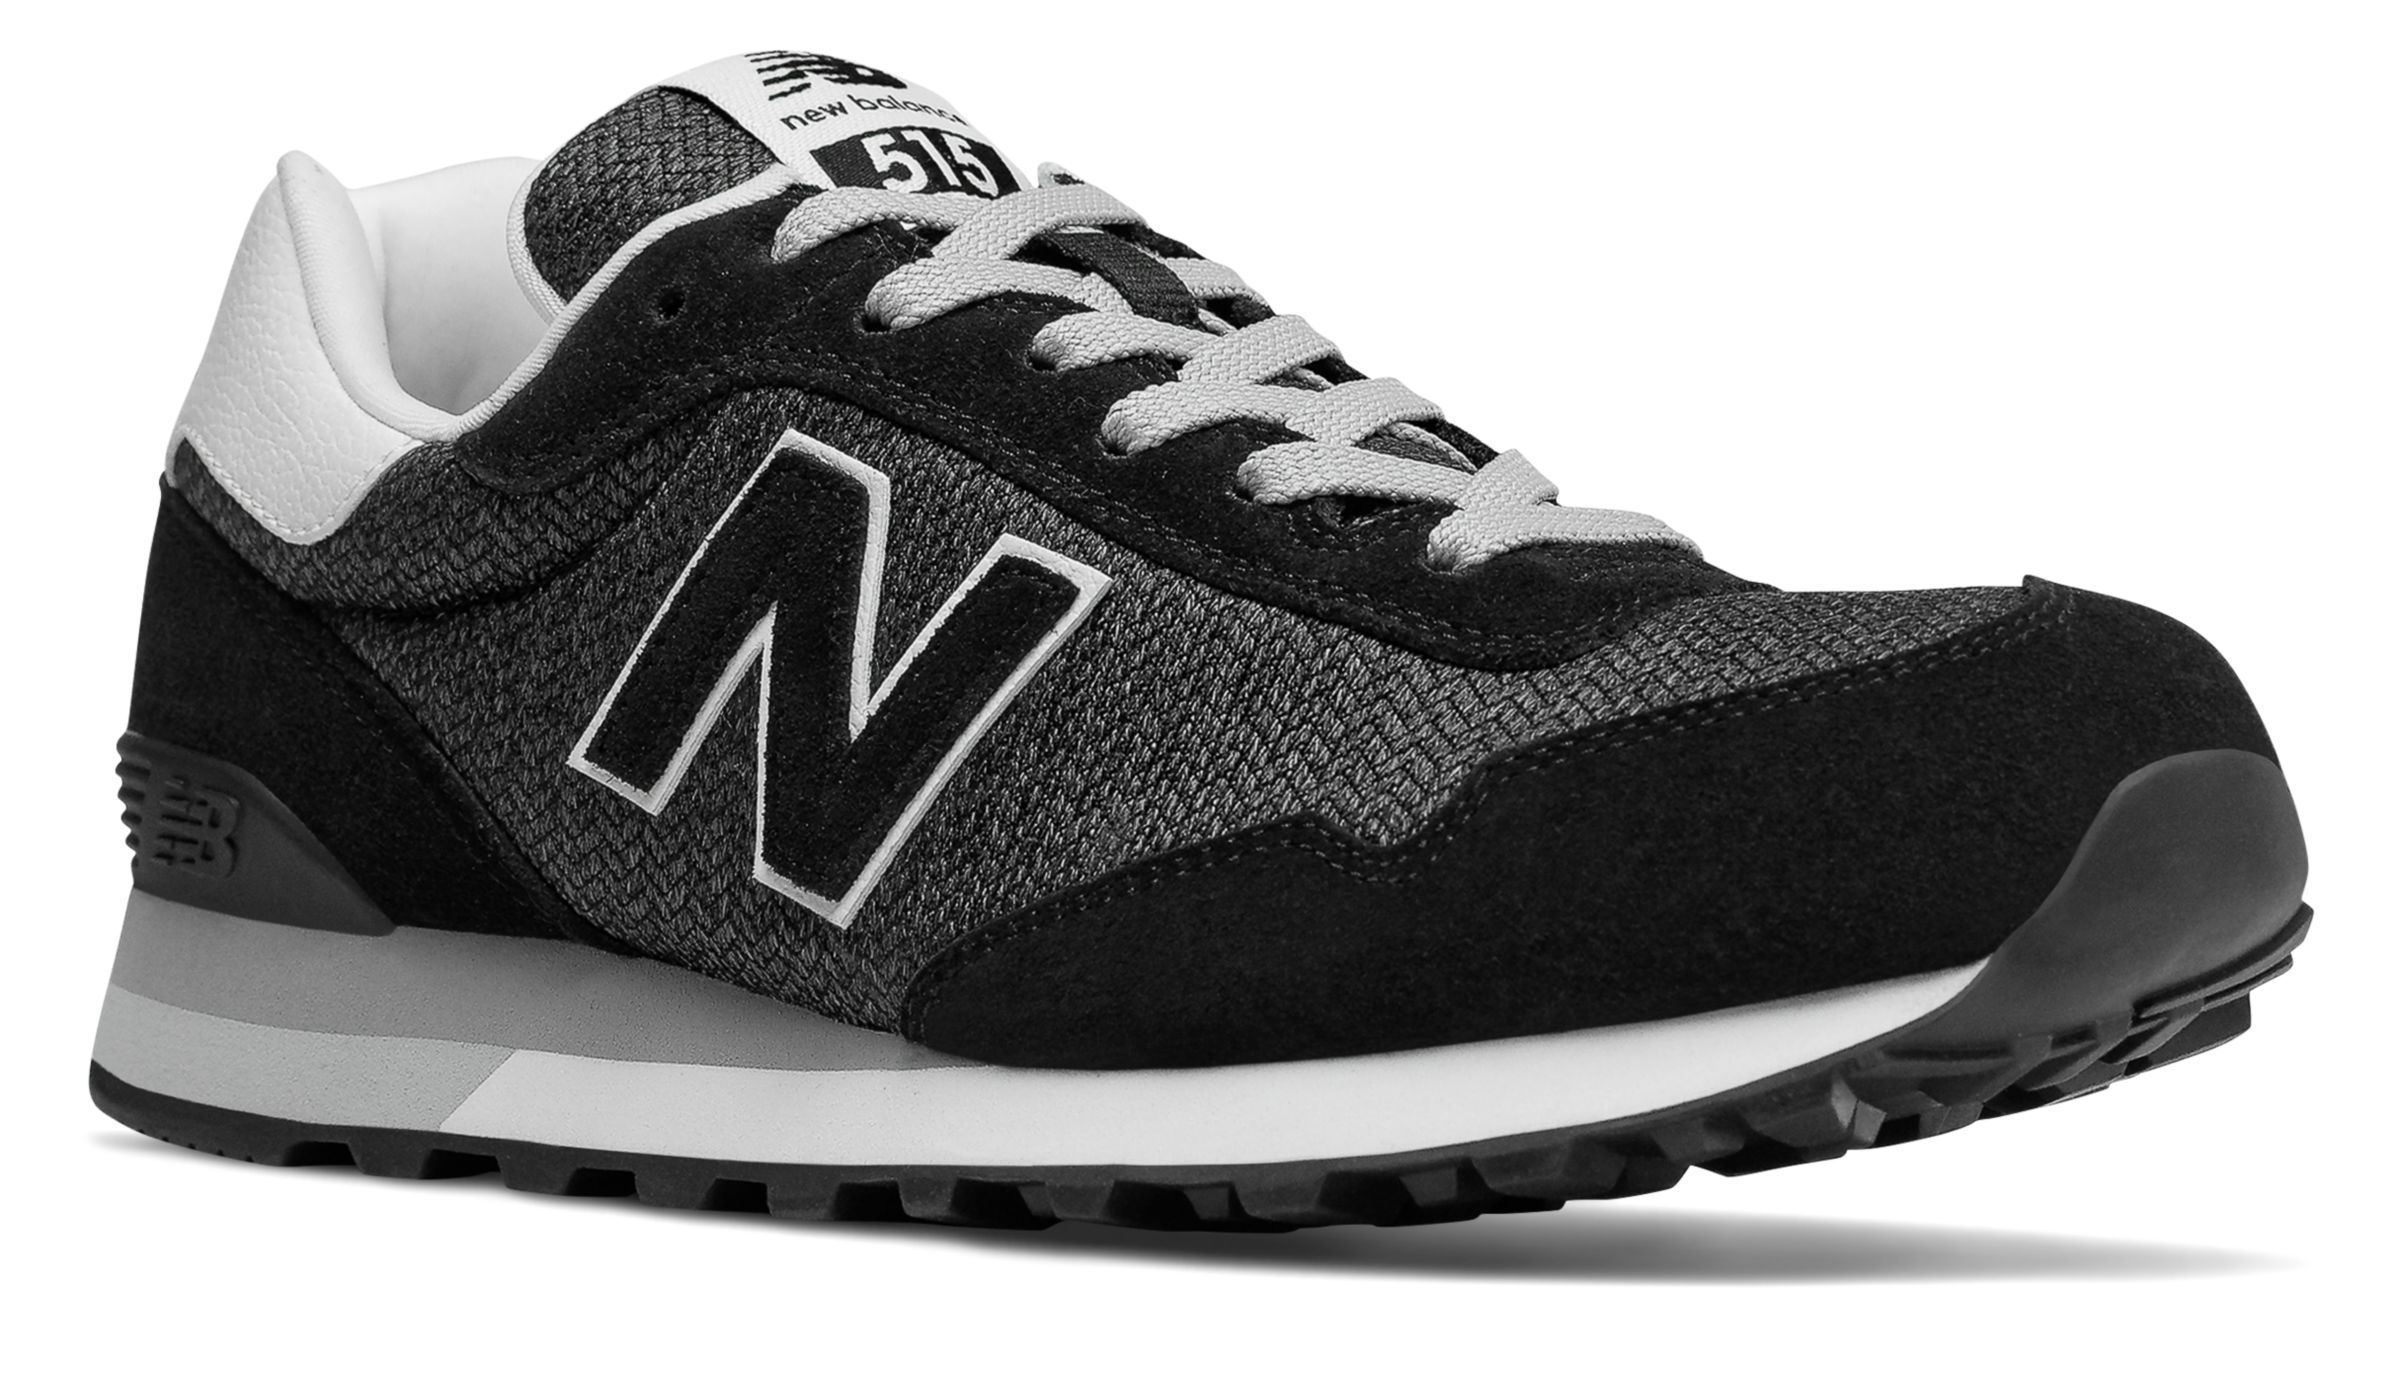 New Balance ML515 on Sale - Discounts Up to 54% Off on ML515CSD at Joe's New  Balance Outlet